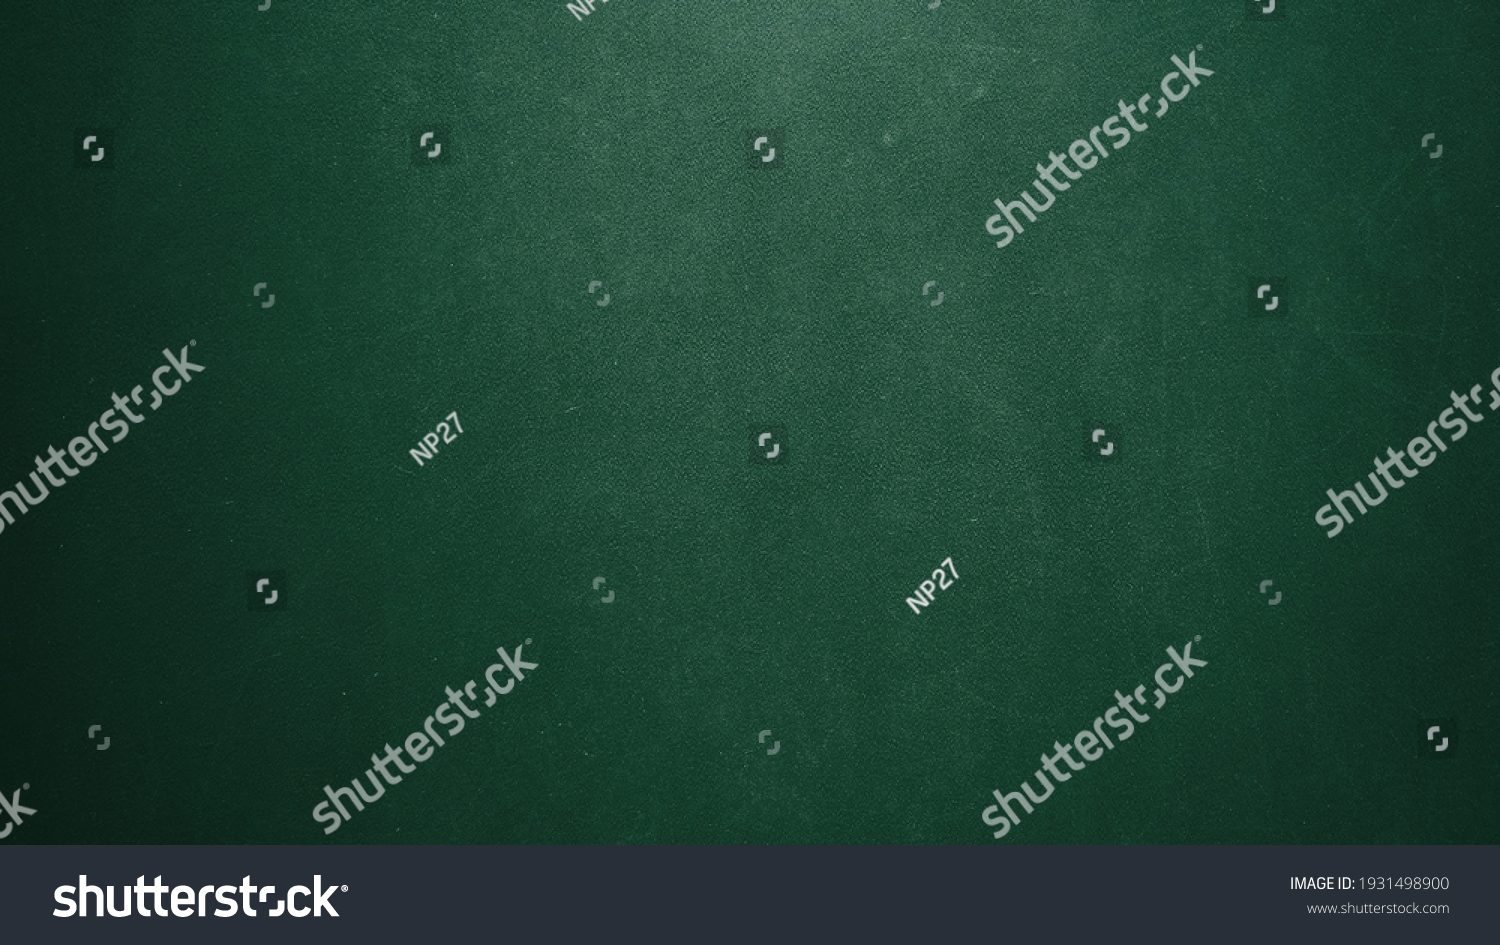 Blank green chalkboard for textured background. #1931498900